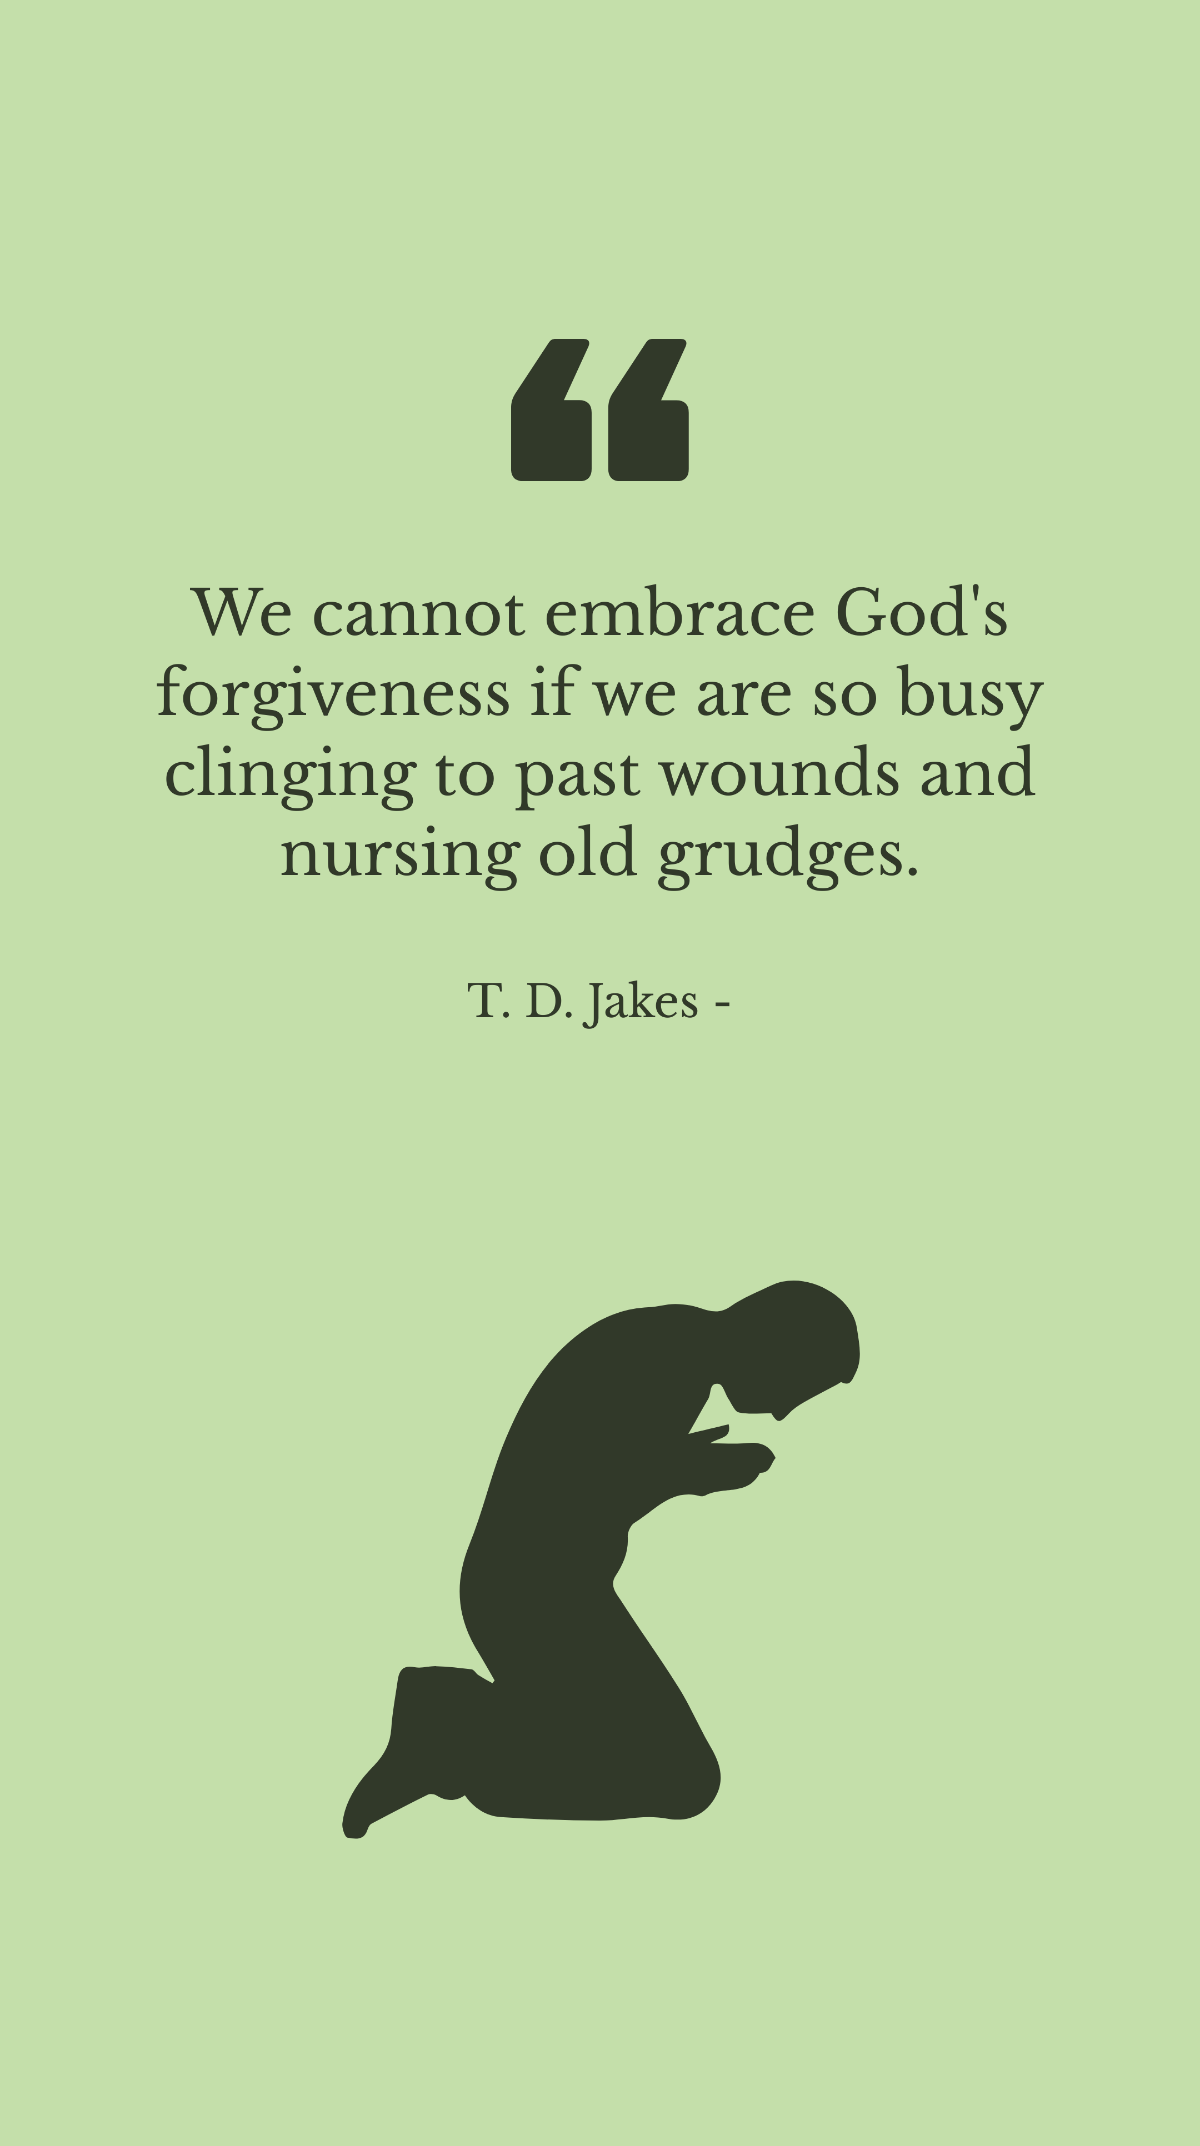 T. D. Jakes - We cannot embrace God's forgiveness if we are so busy clinging to past wounds and nursing old grudges. Template